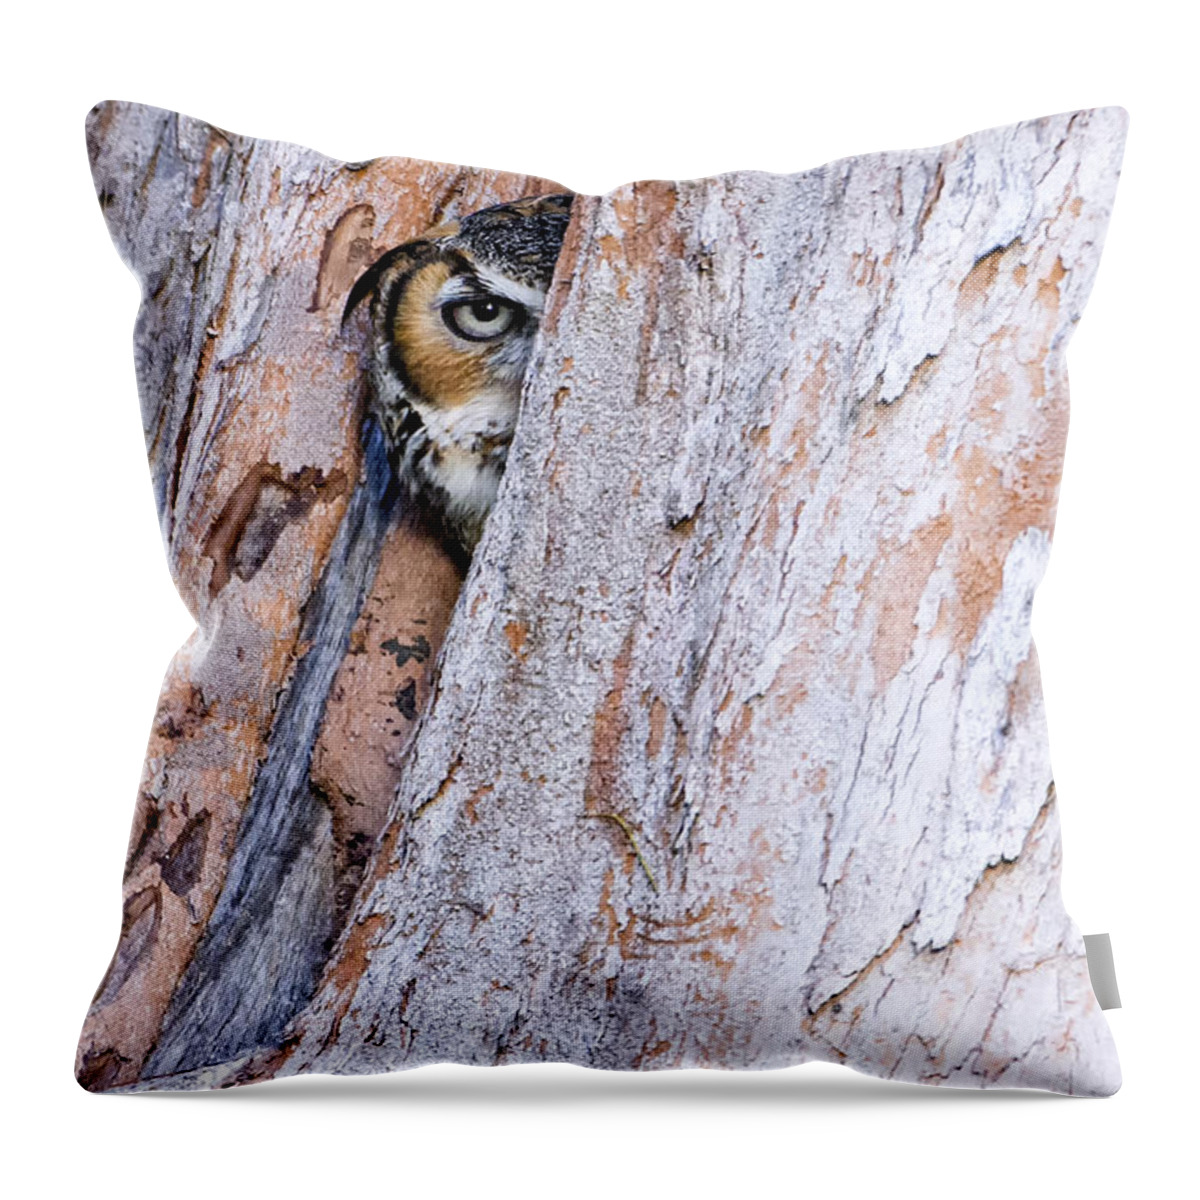 Crystal Yingling Throw Pillow featuring the photograph One Sided by Ghostwinds Photography